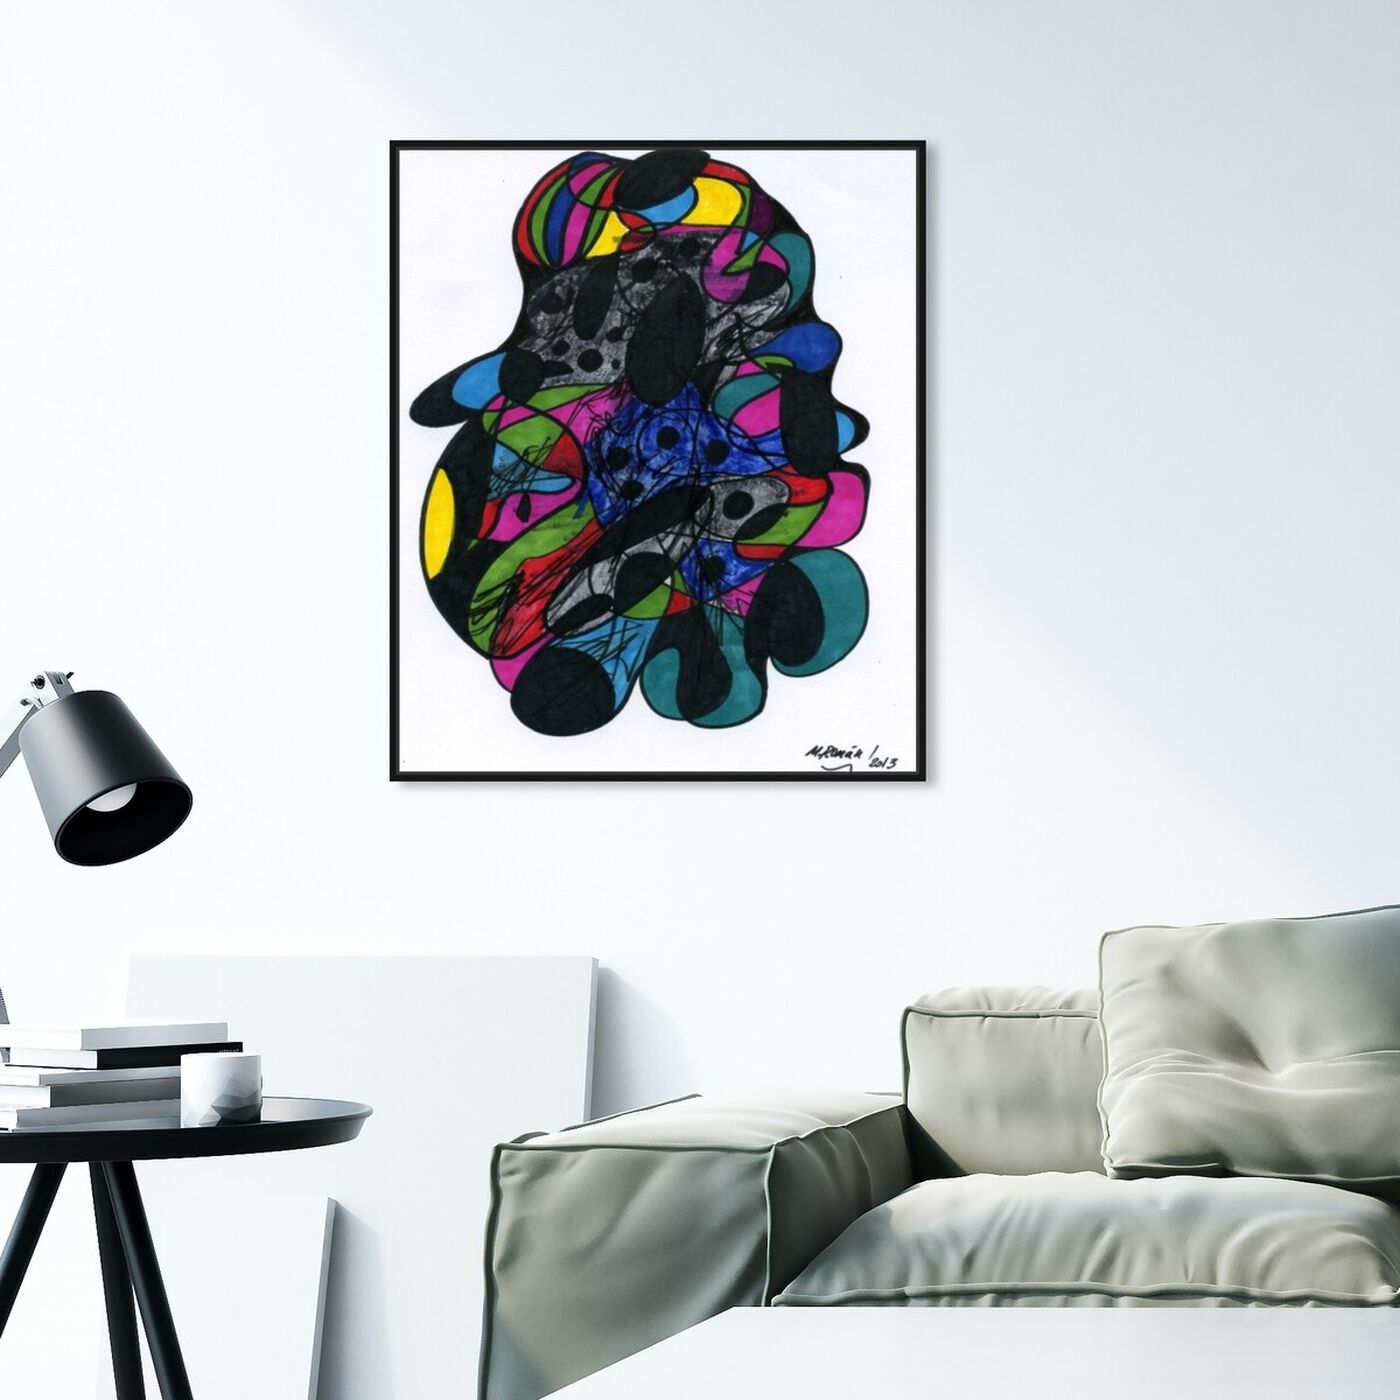 Hanging view of Nebulos featuring abstract and geometric art.